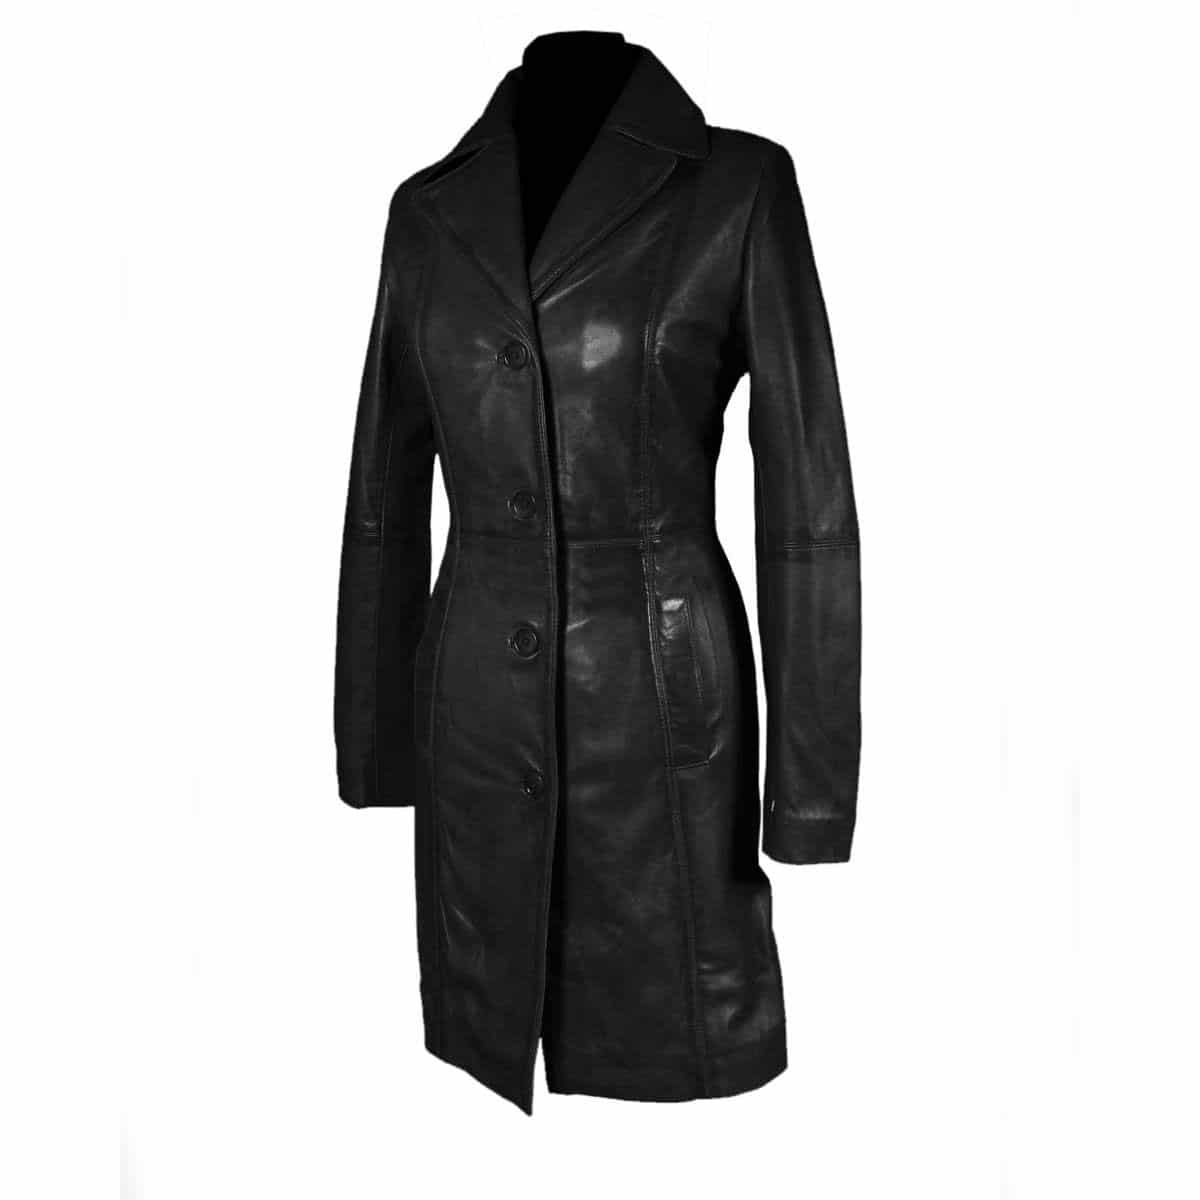 Ladies Black Cow Leather Steampunk Goth Style Trench Coat - T16 - BLK